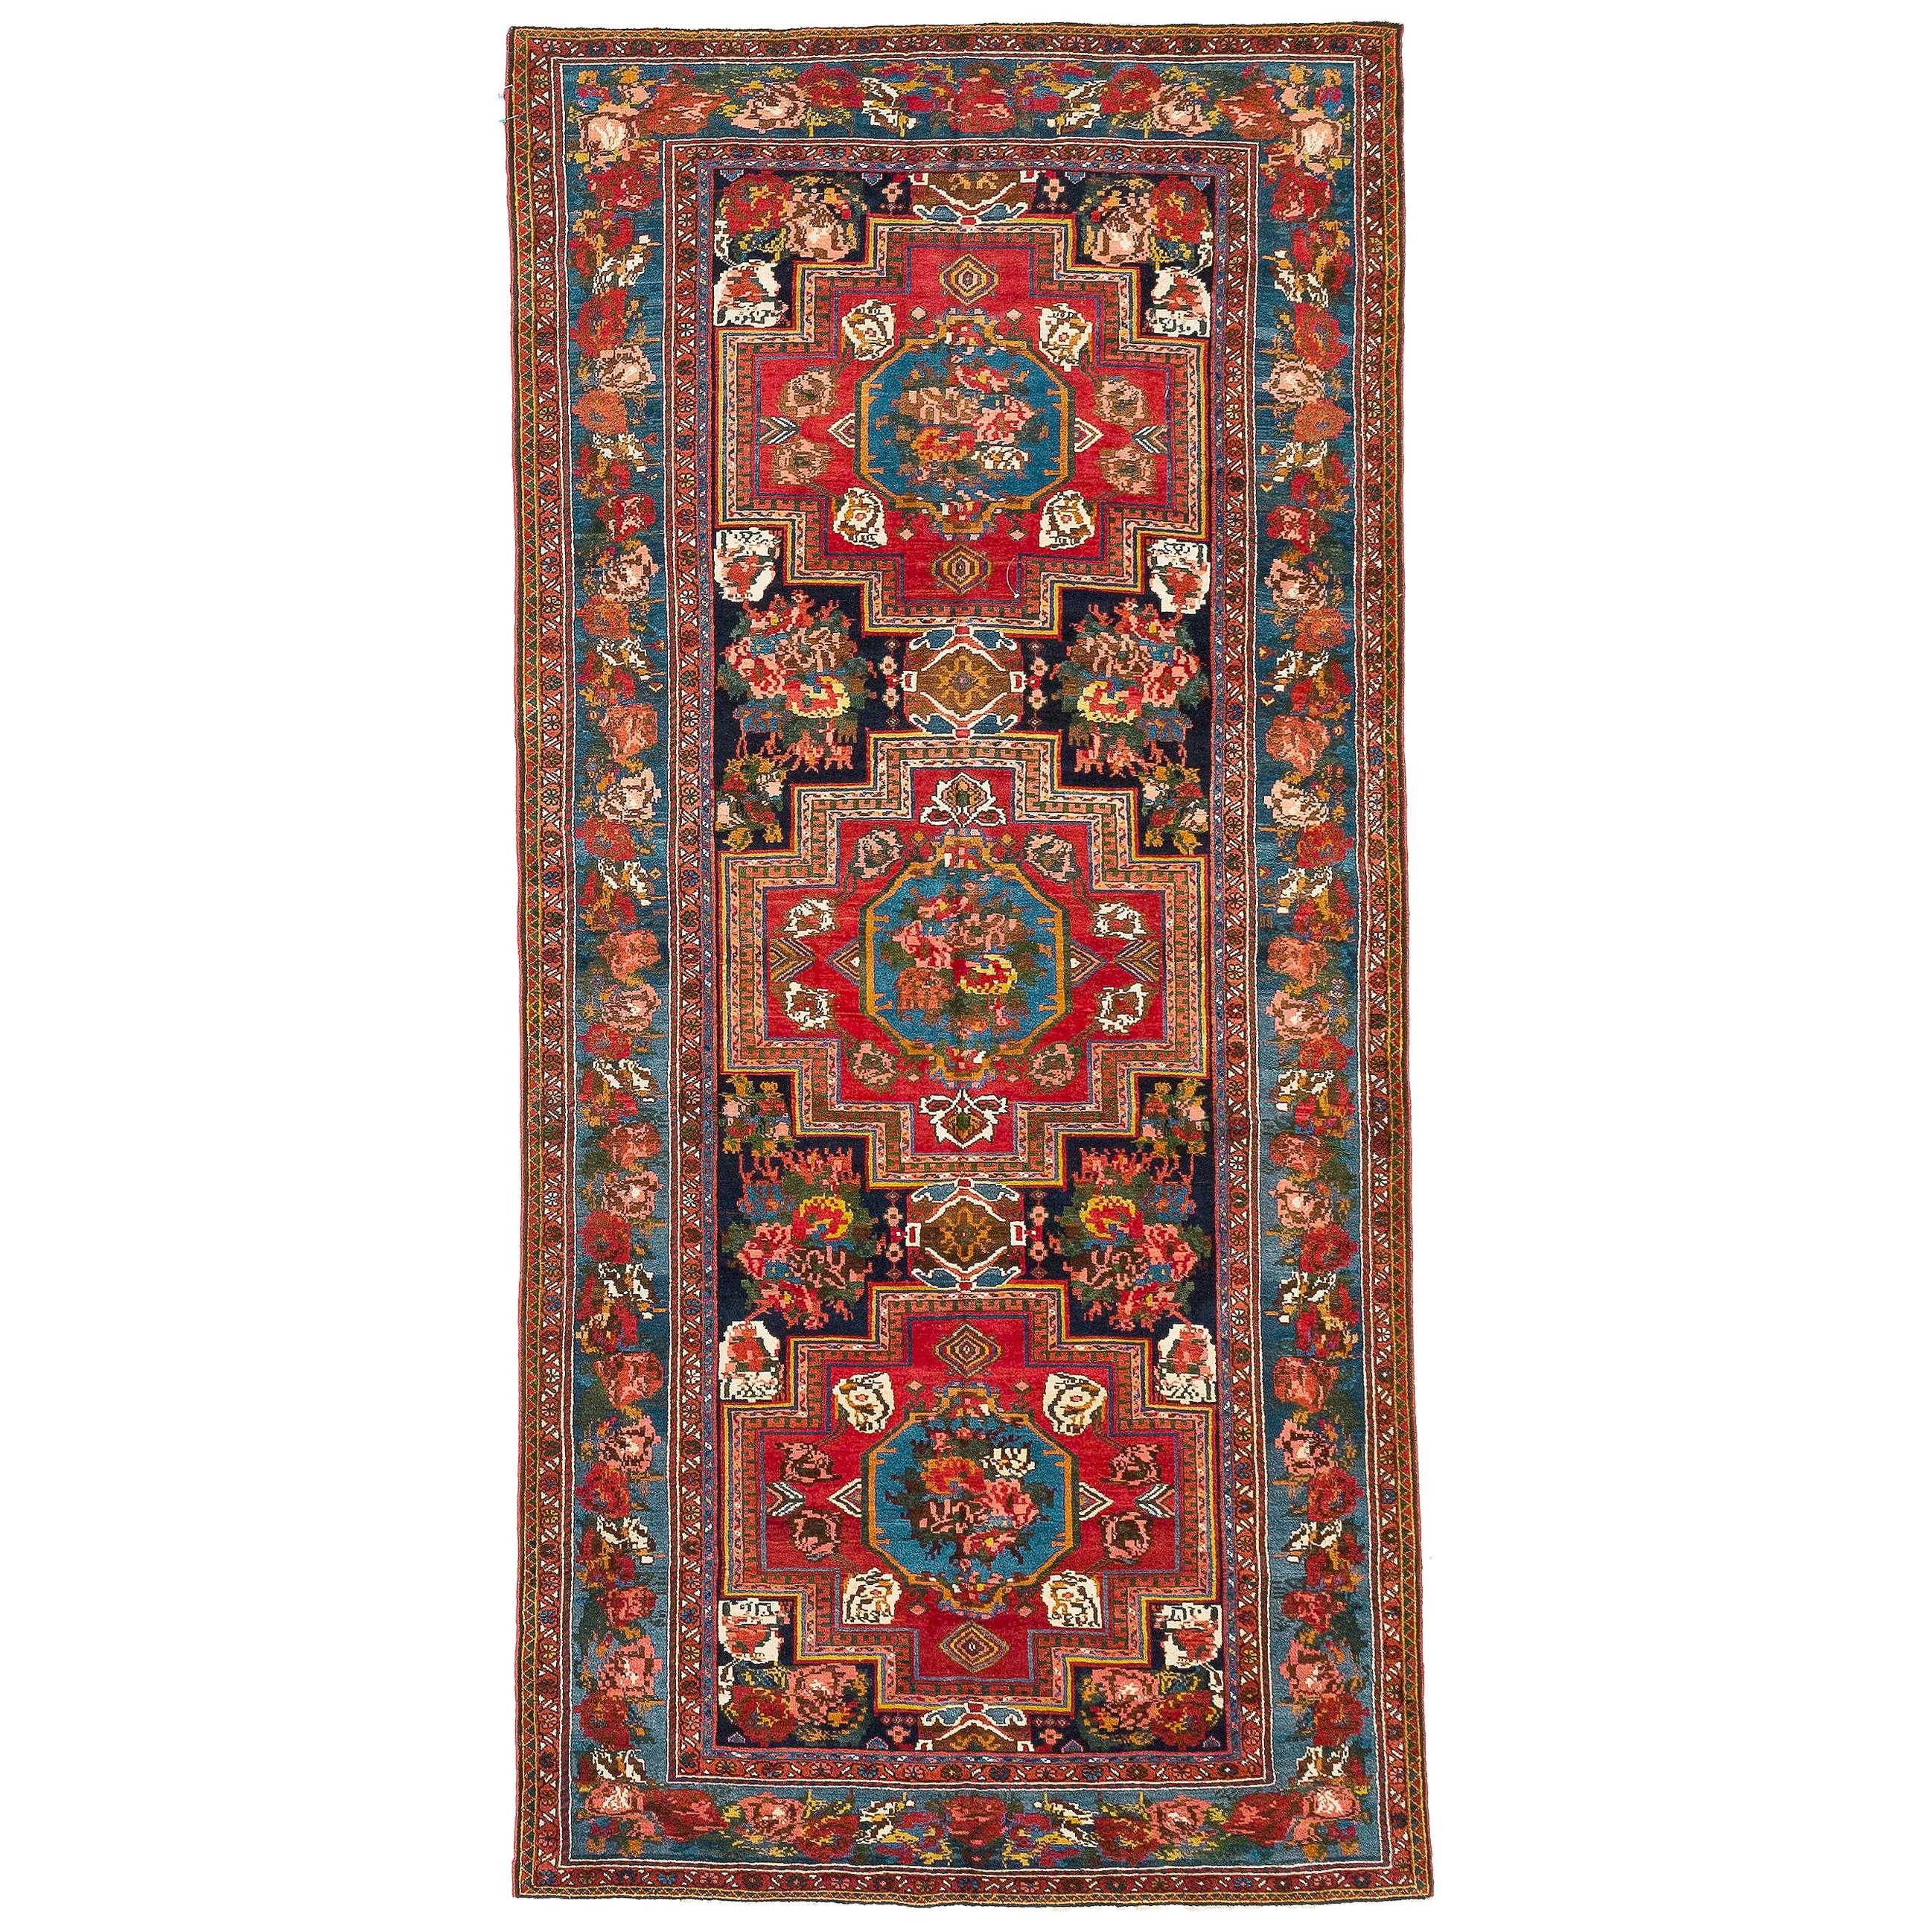 Antique Persian Bakhtiar Rug with Blue and Red Floral Medallions